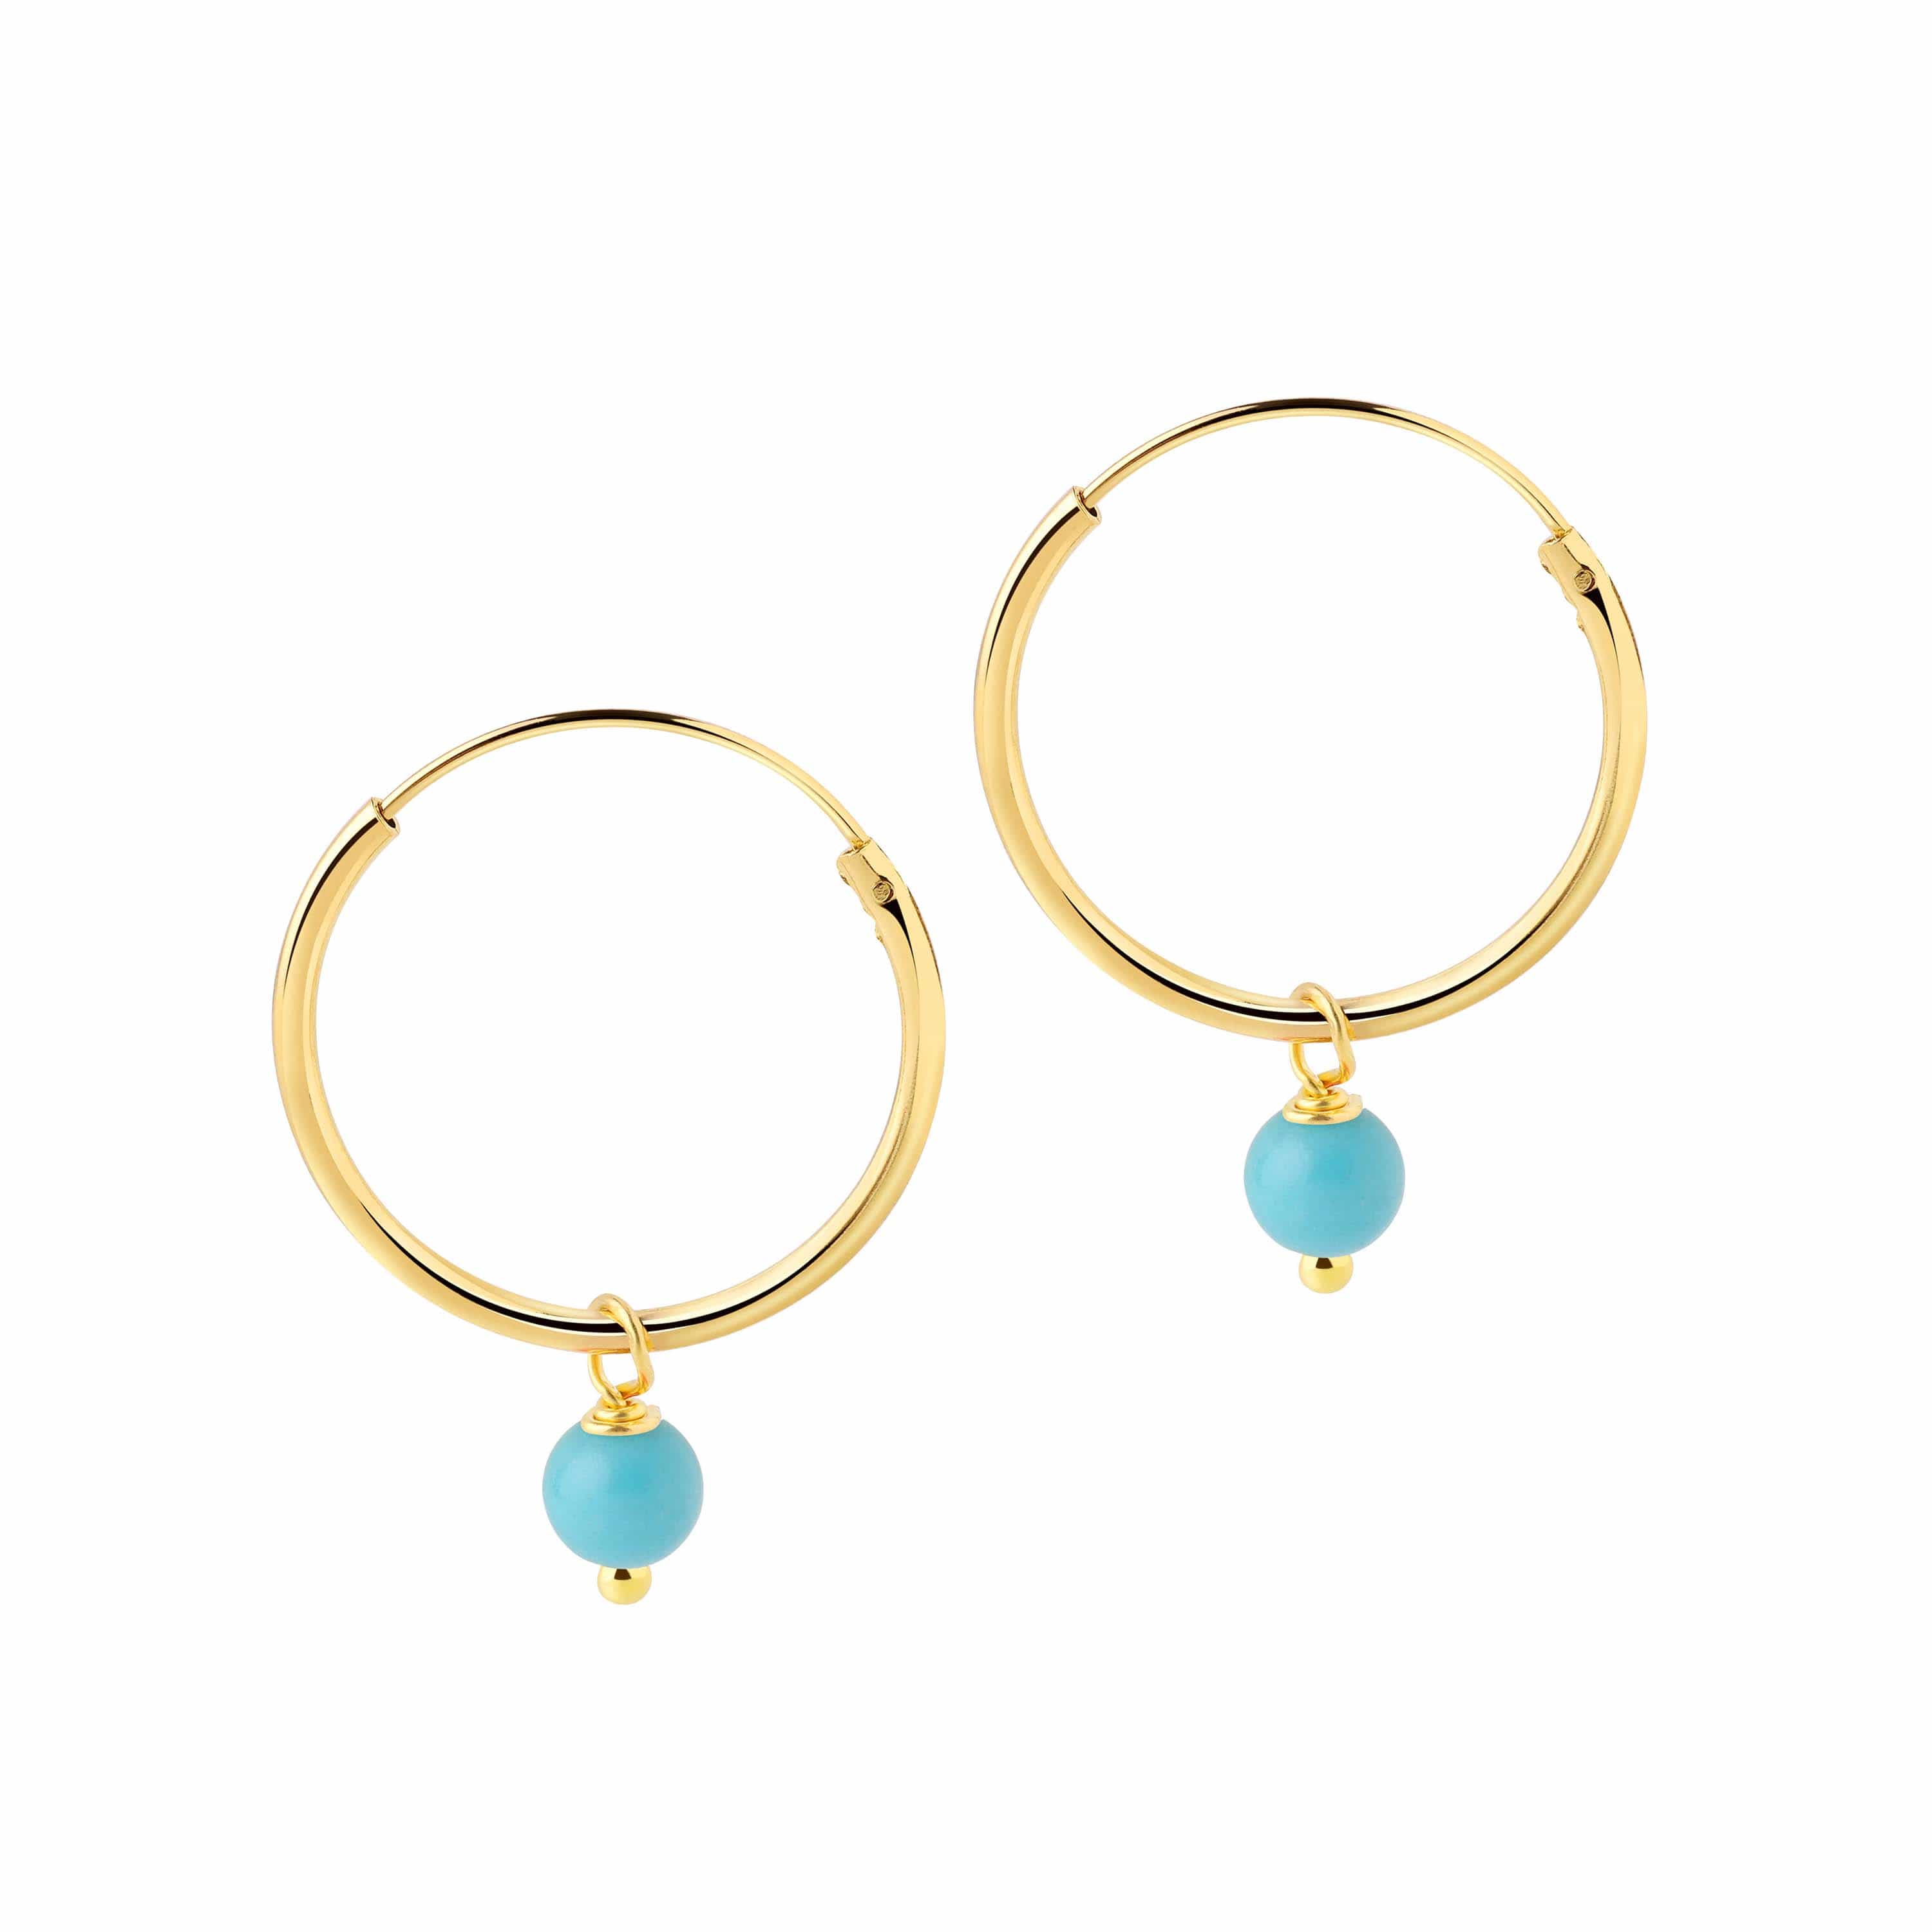 Silver Hoop Earrings with Turquoise Blue Stone